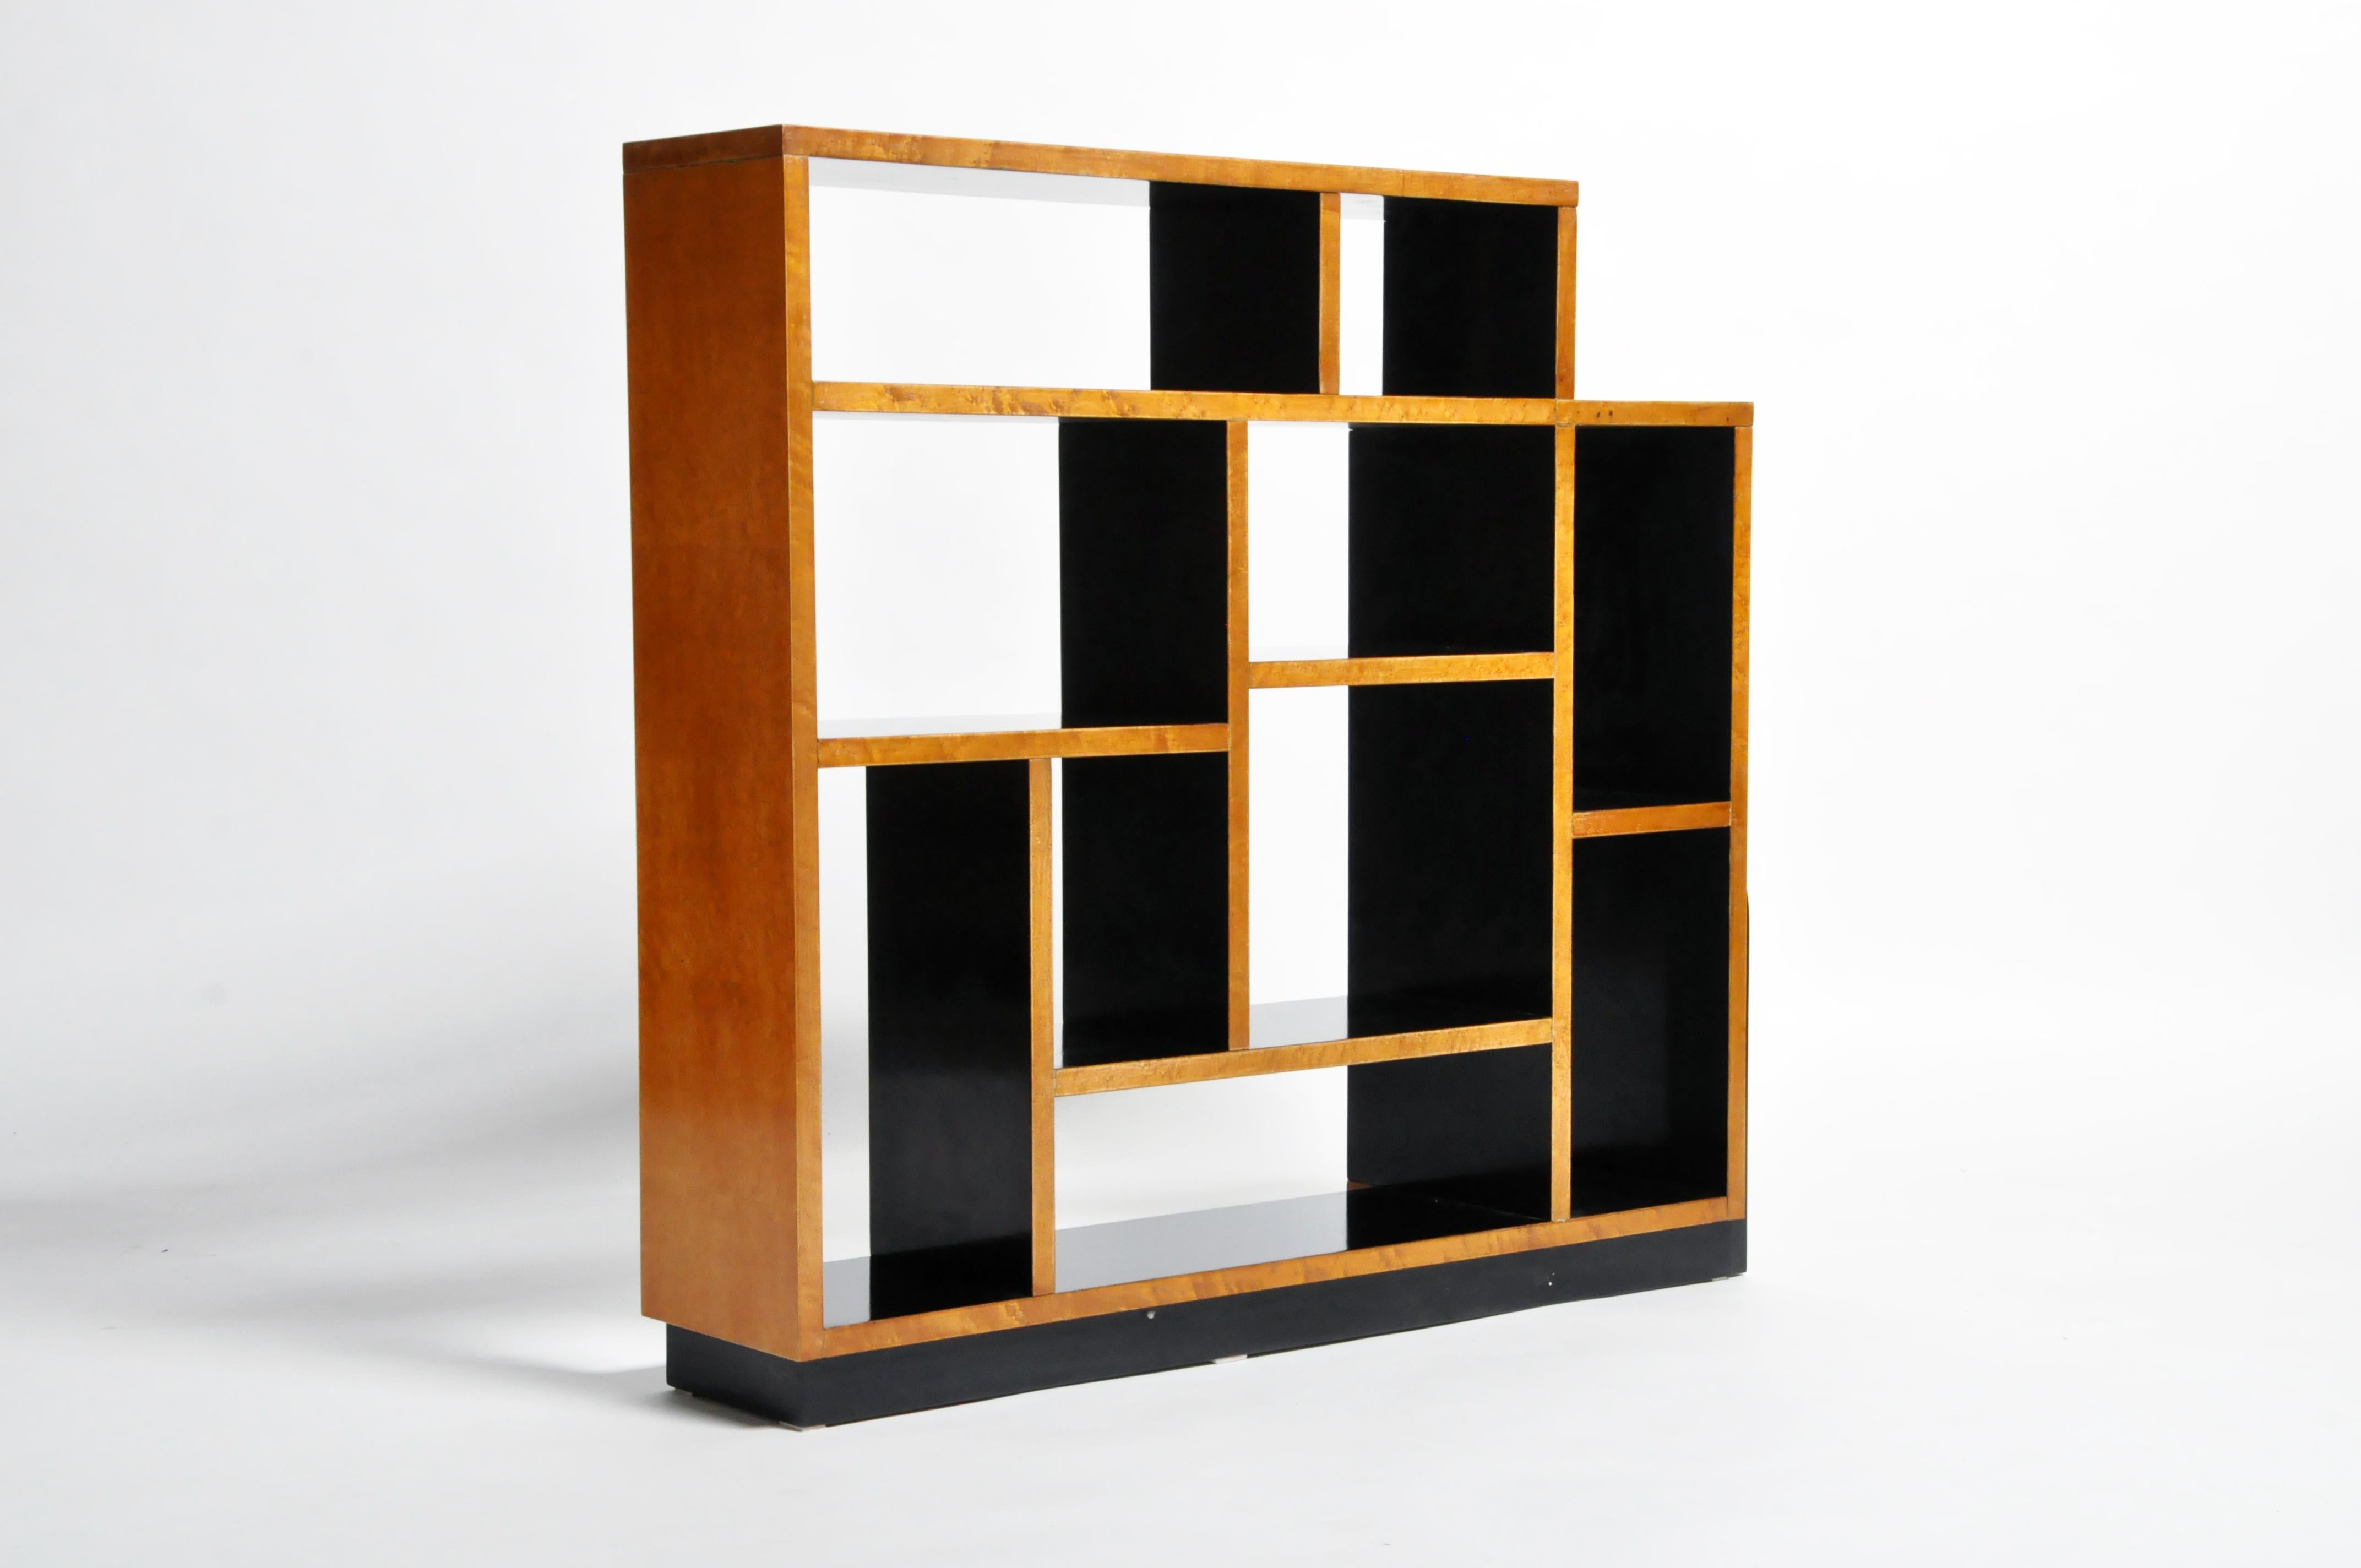 A small display shelf from Hungary made from maple and black lacquer, circa 1940s.